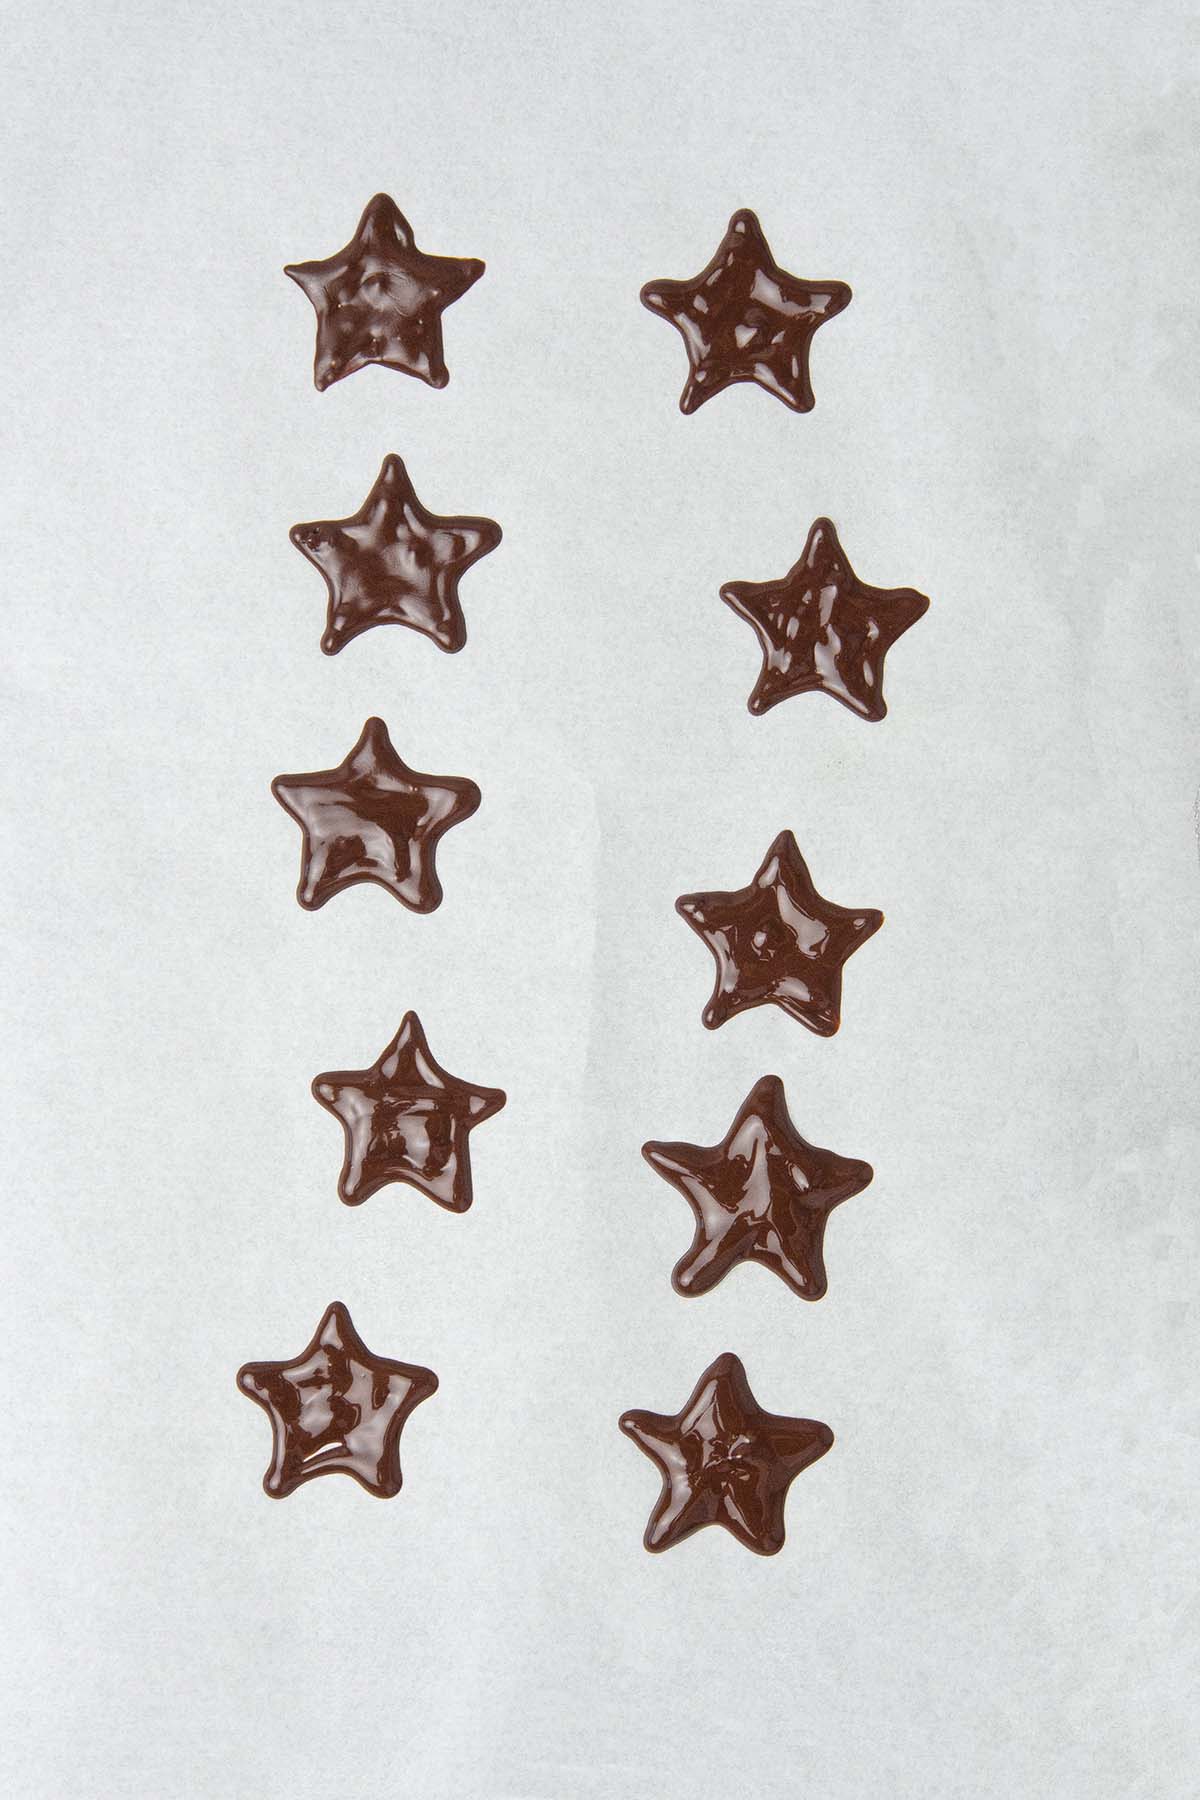 Star shaped chocolate decoration on a baking paper